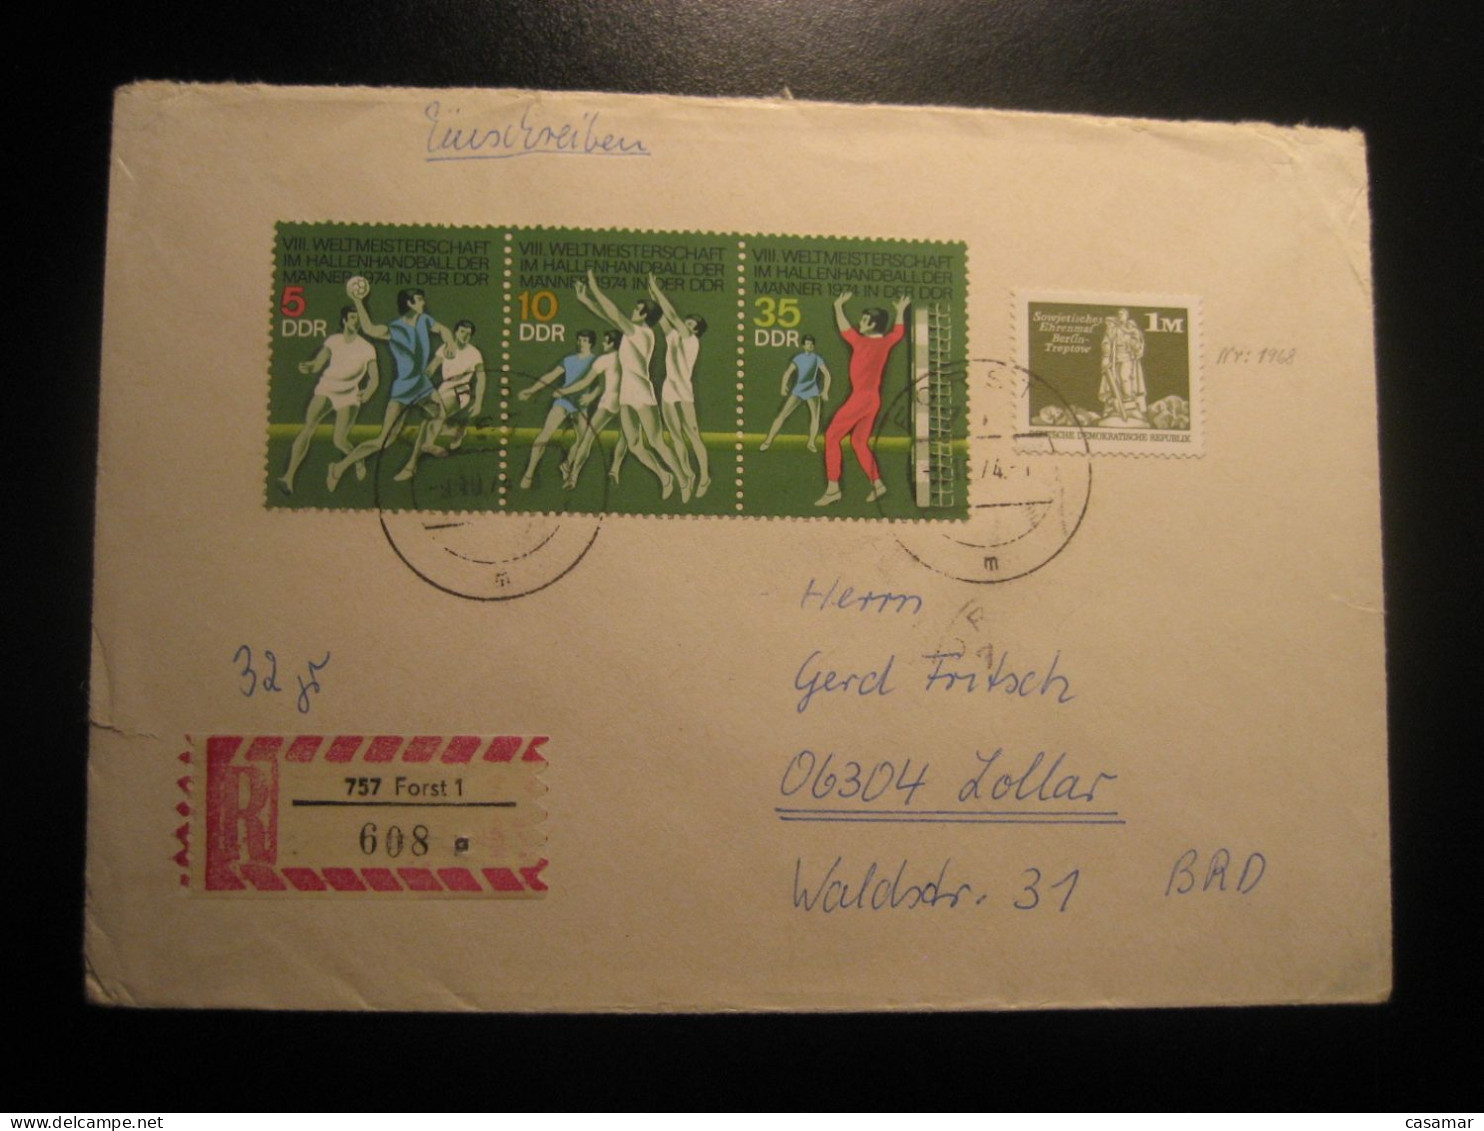 FORST 1974 Handball World Championship Balonmano Stamps On Registered Cover Tauschsendung ZKPH Label DDR GERMANY - Hand-Ball